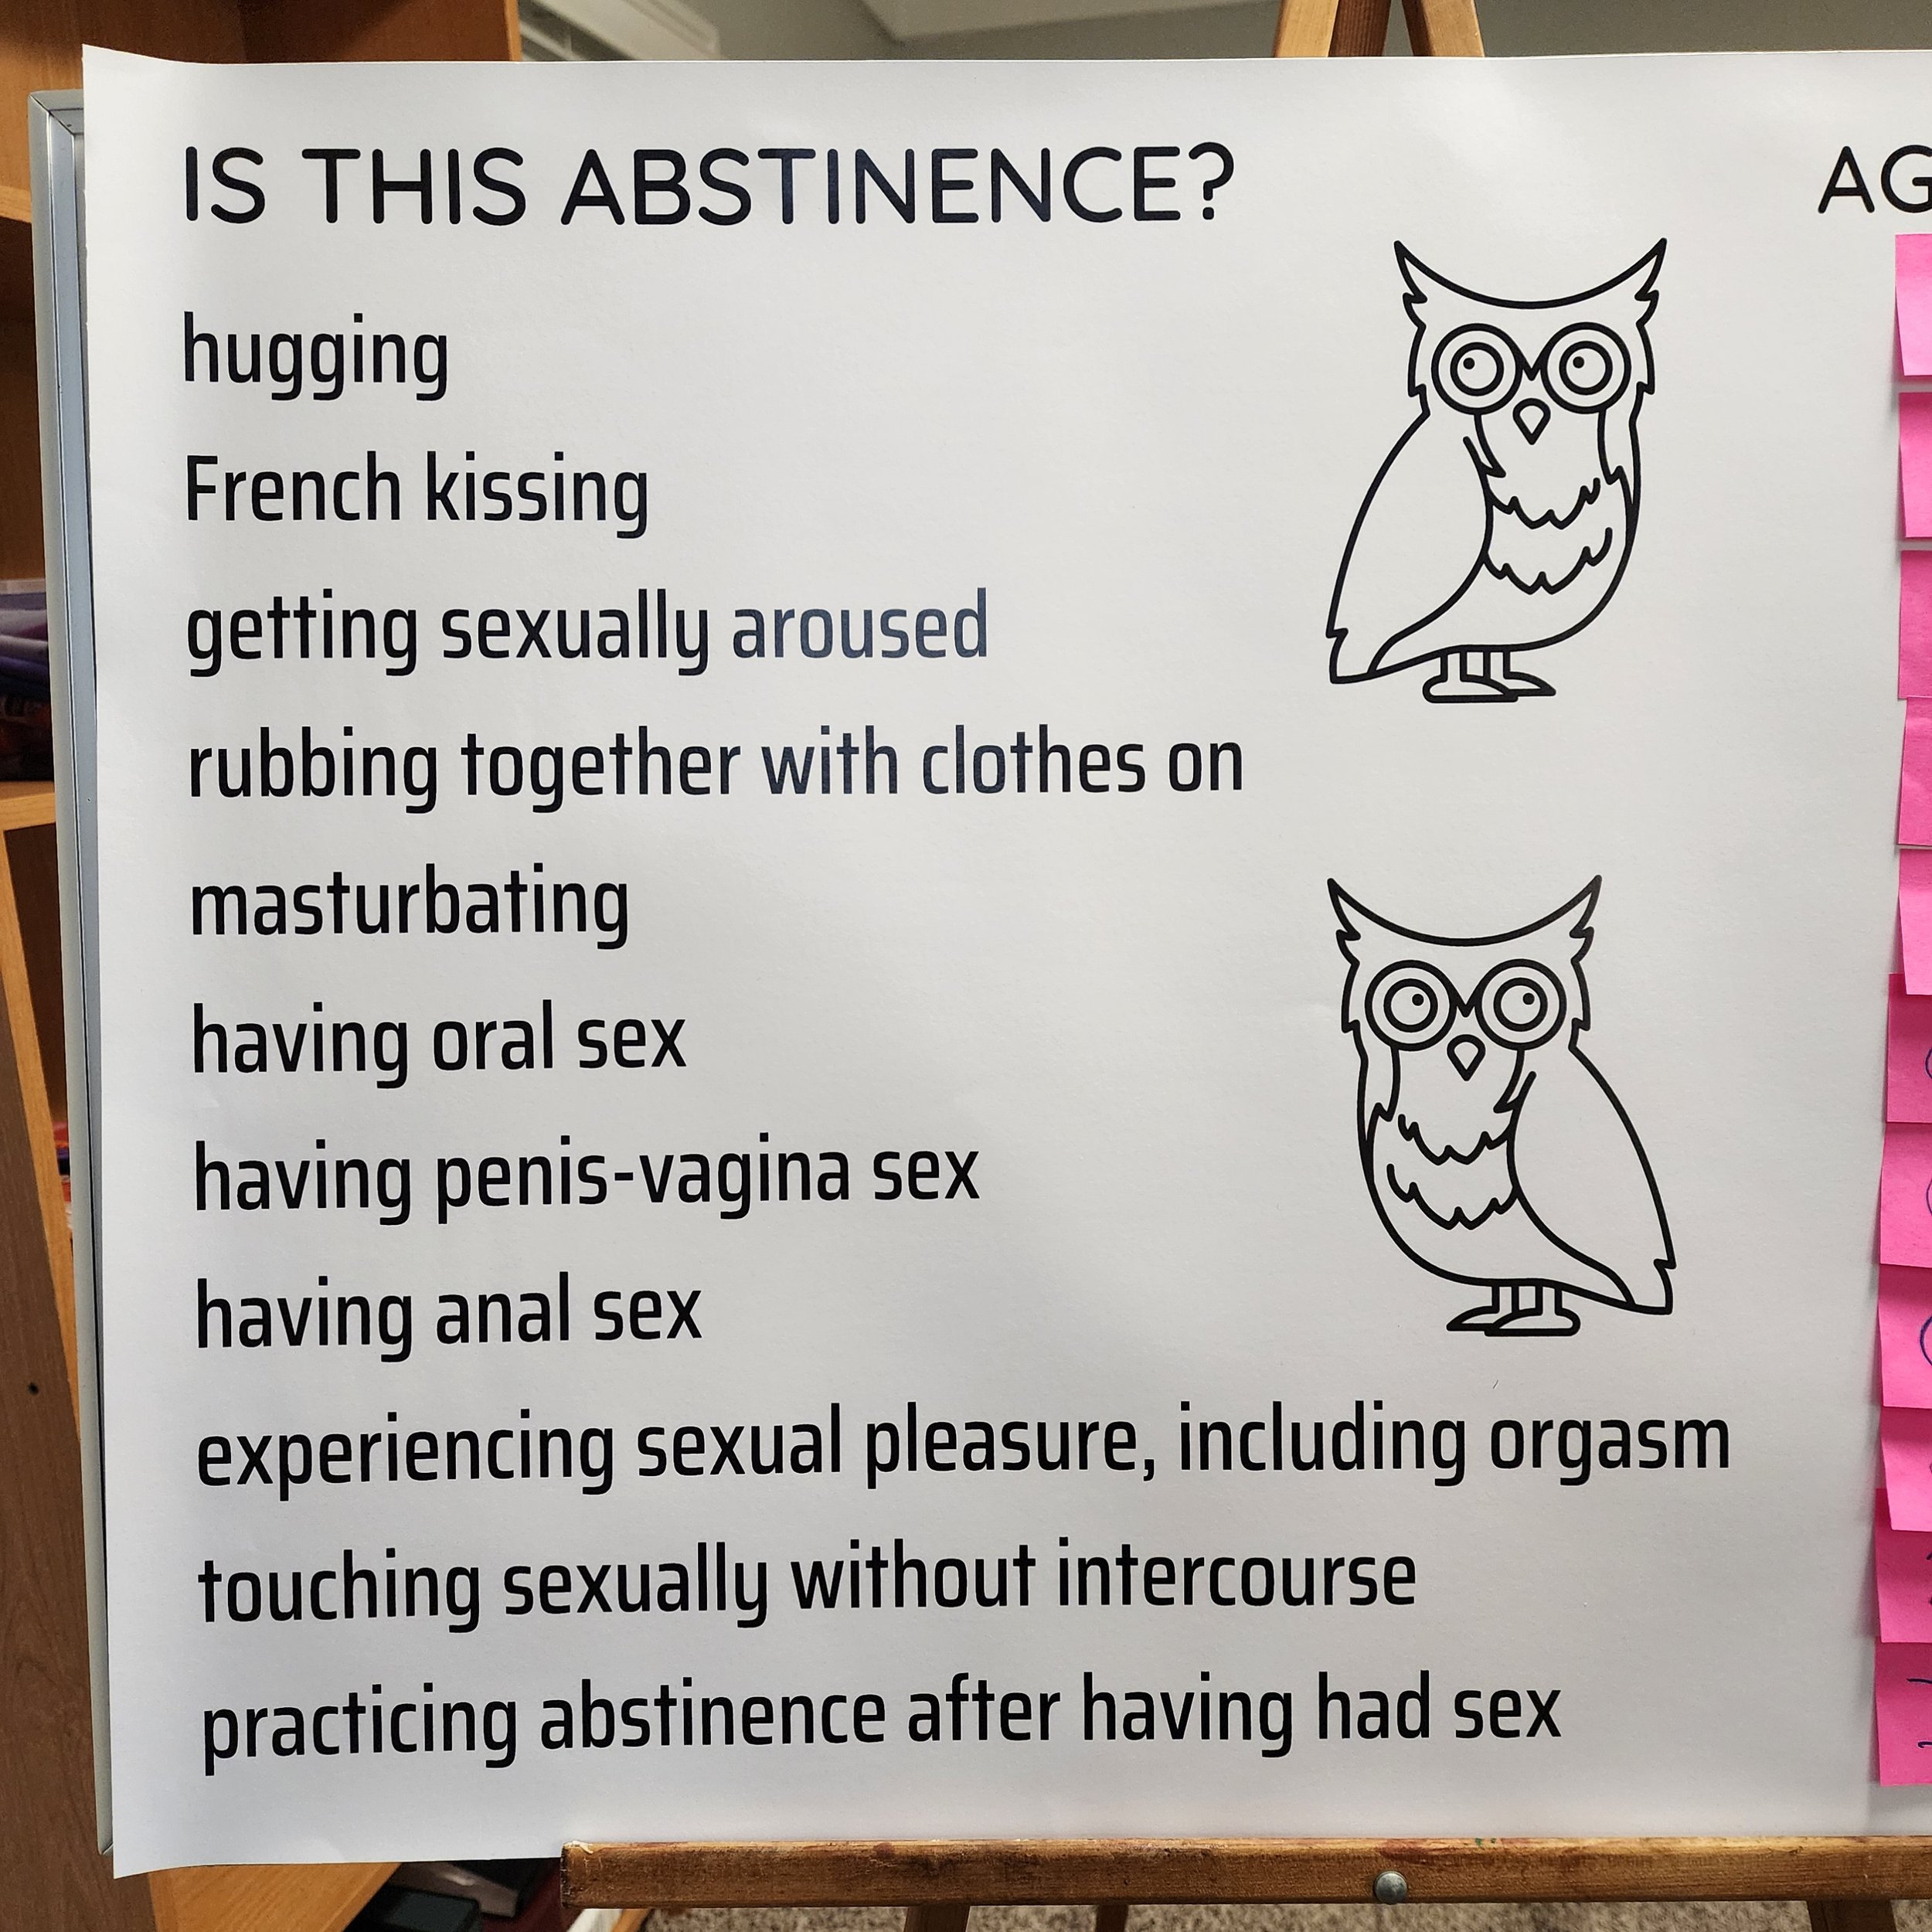 redefining abstinence